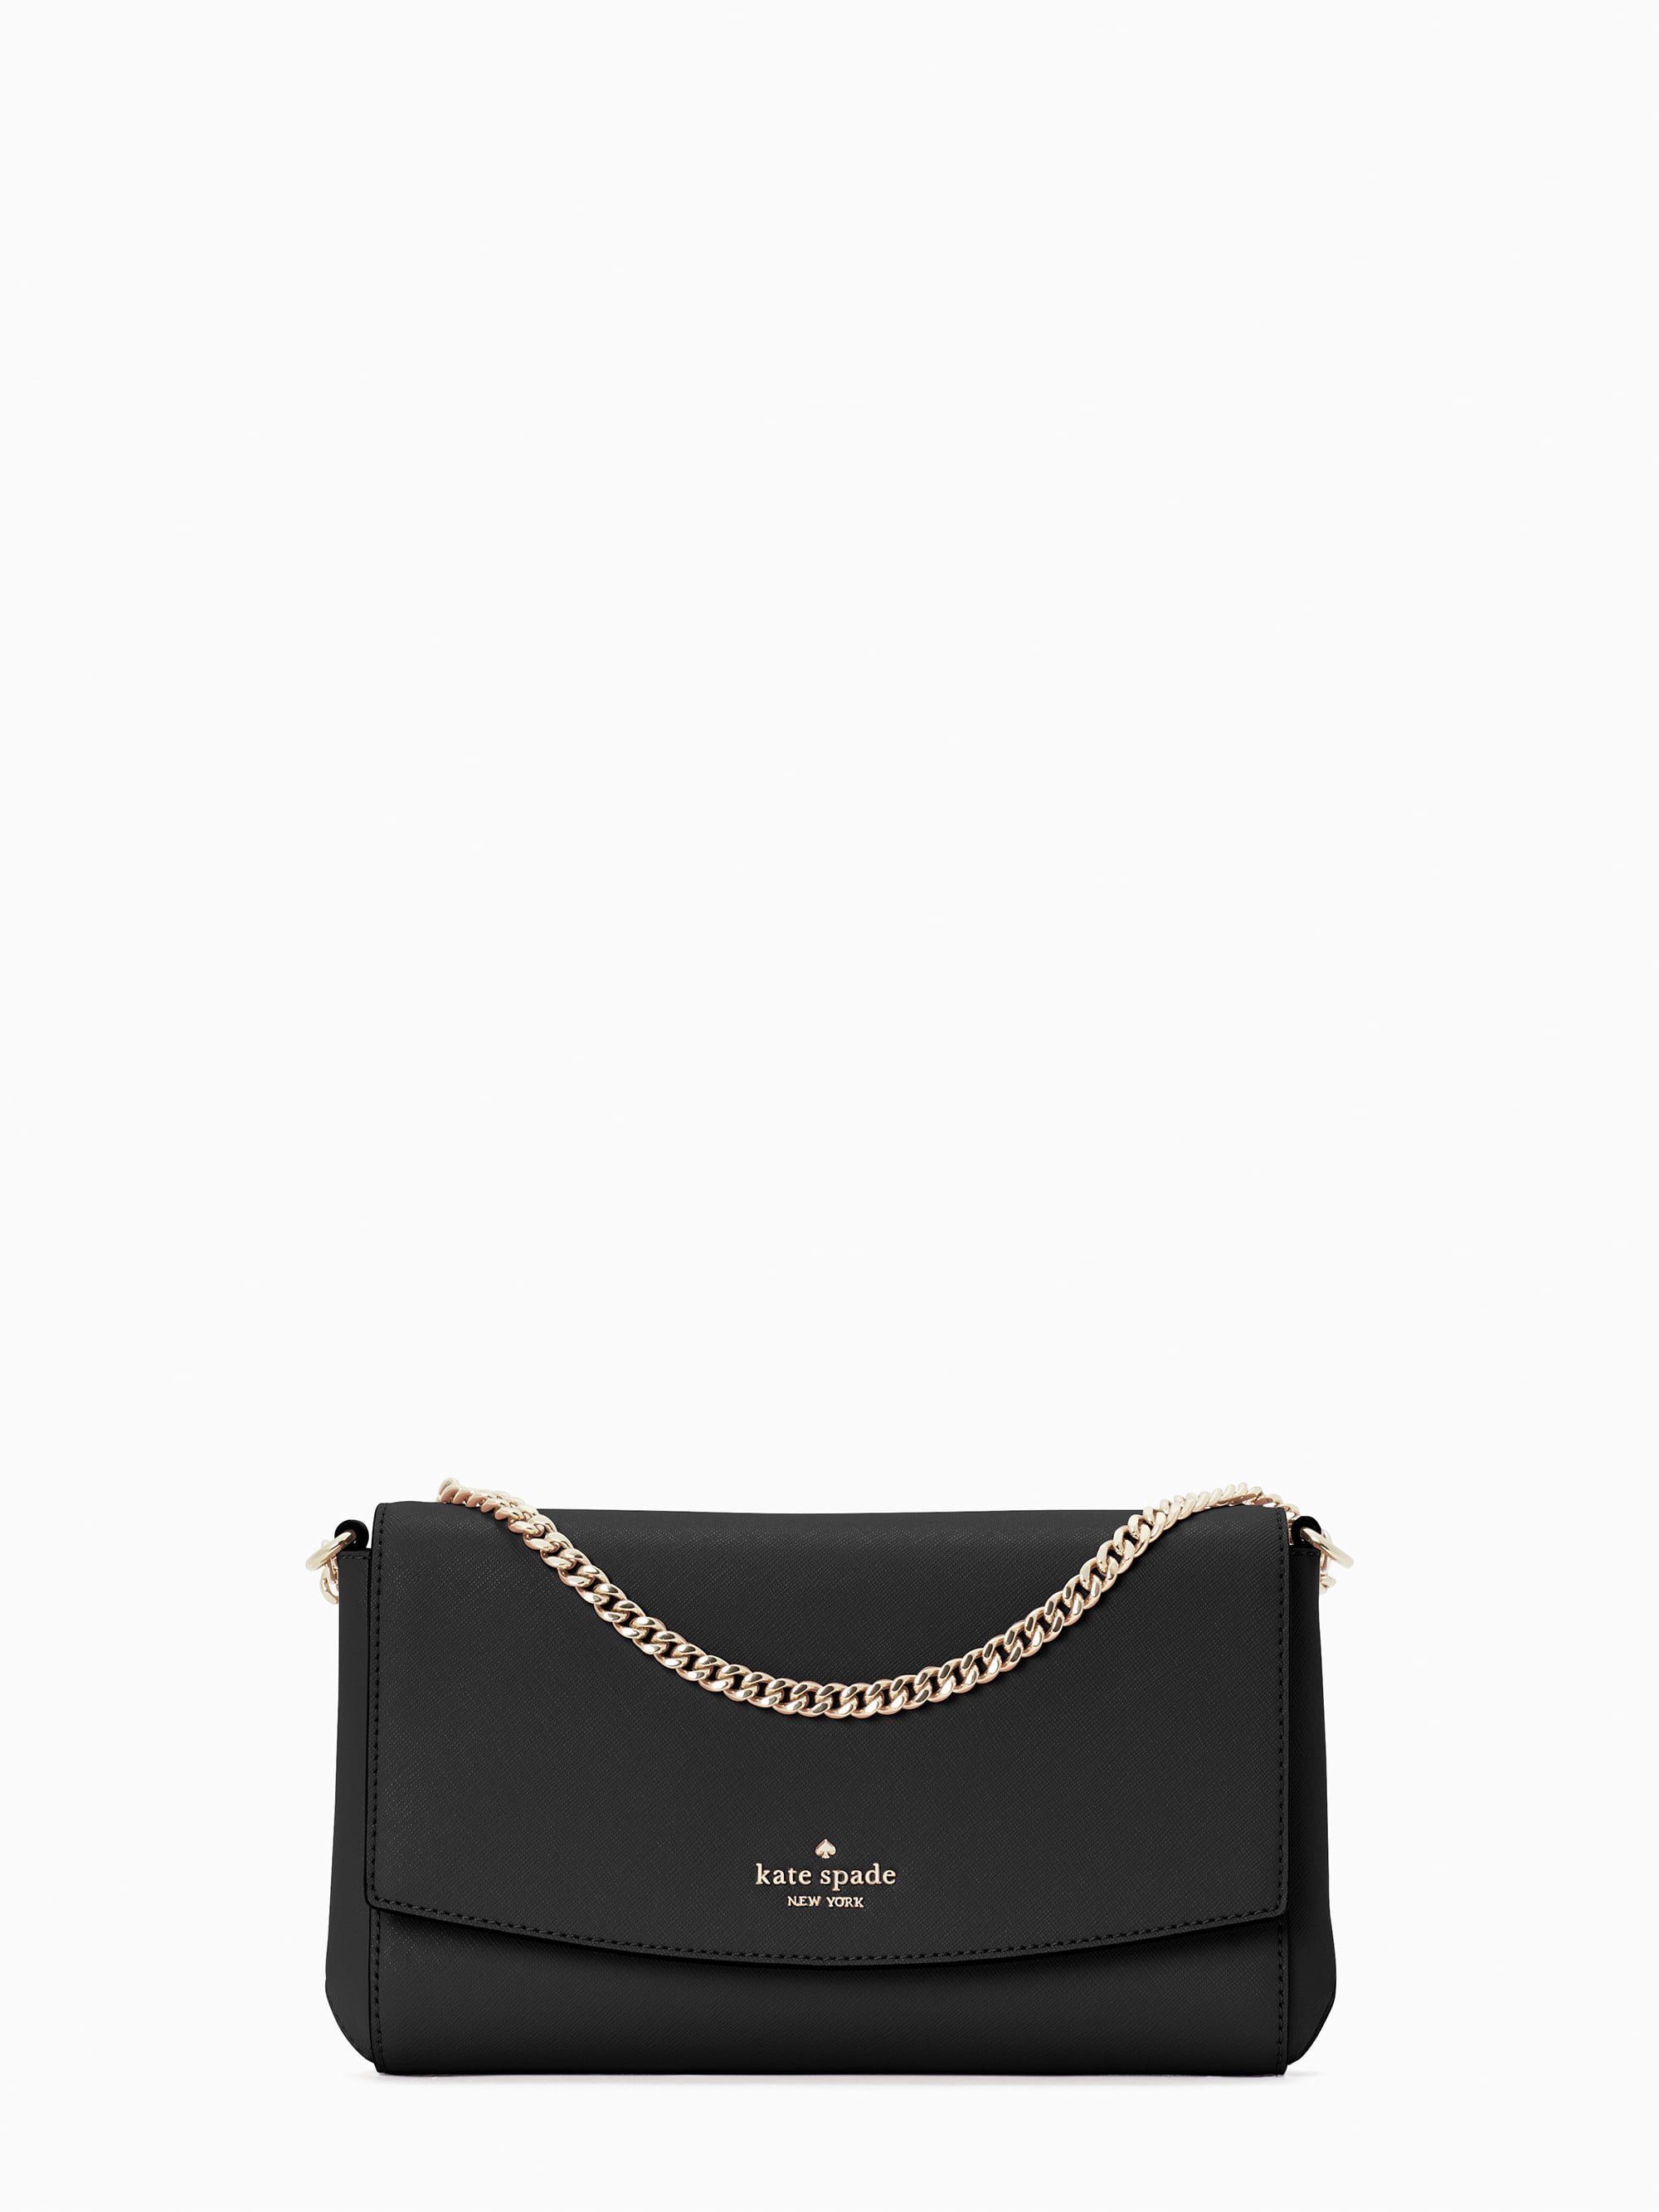 kate spade new york Crossbody - Lily Avenue Carah ($178) ❤ liked on  Polyvore featuring bags, handbags, shoulder bag…